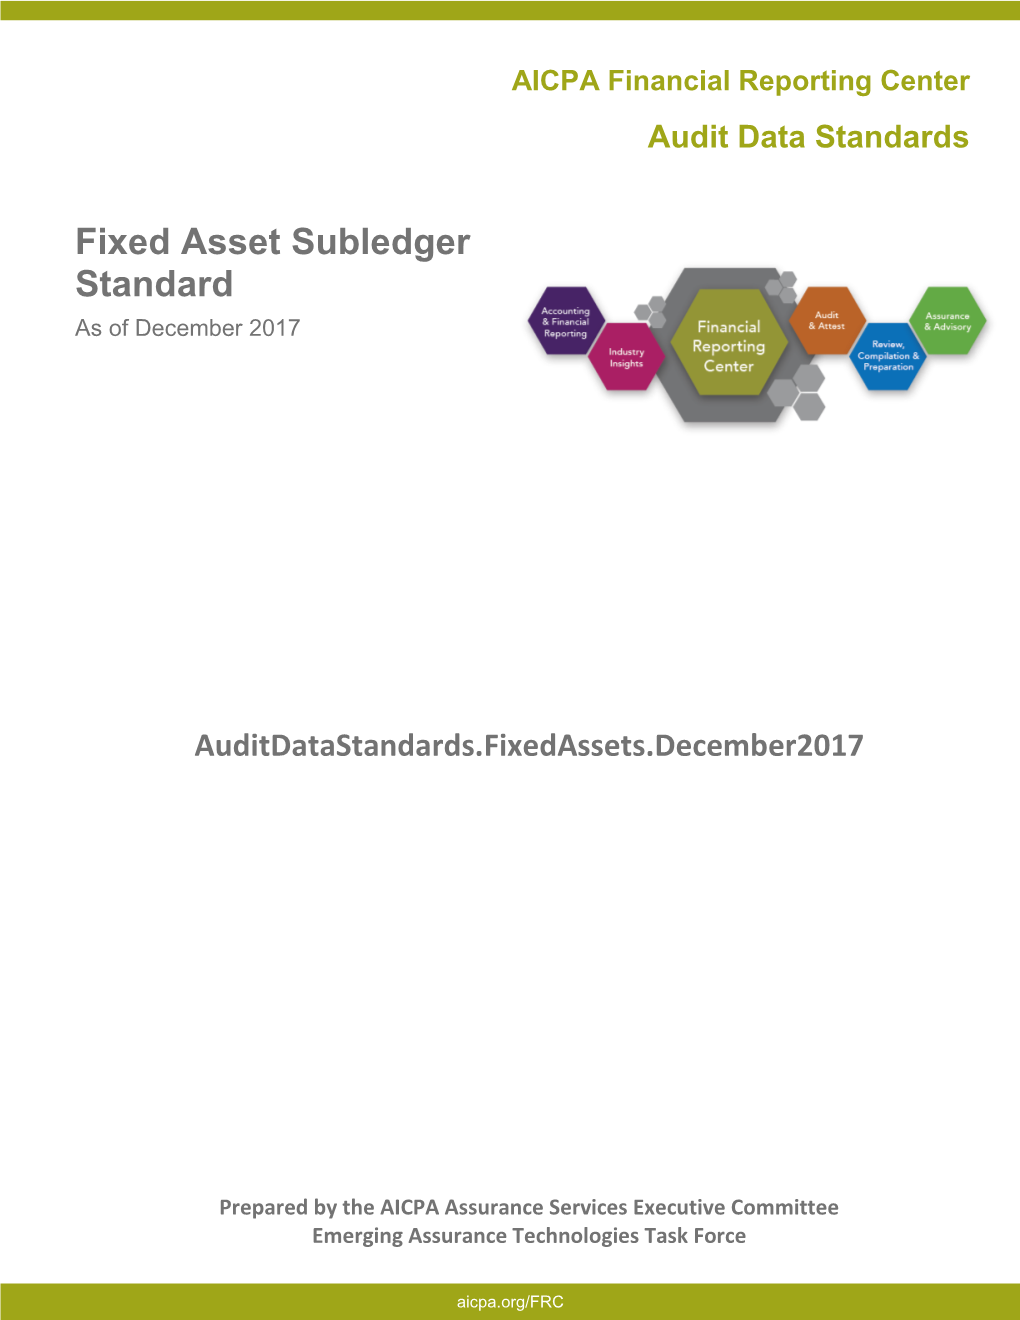 Fixed Asset Subledger Standard Should Be Used in Conjunction with the Audit Data Standard – Base Standard Document, Which Is Located on the AICPA’S Website